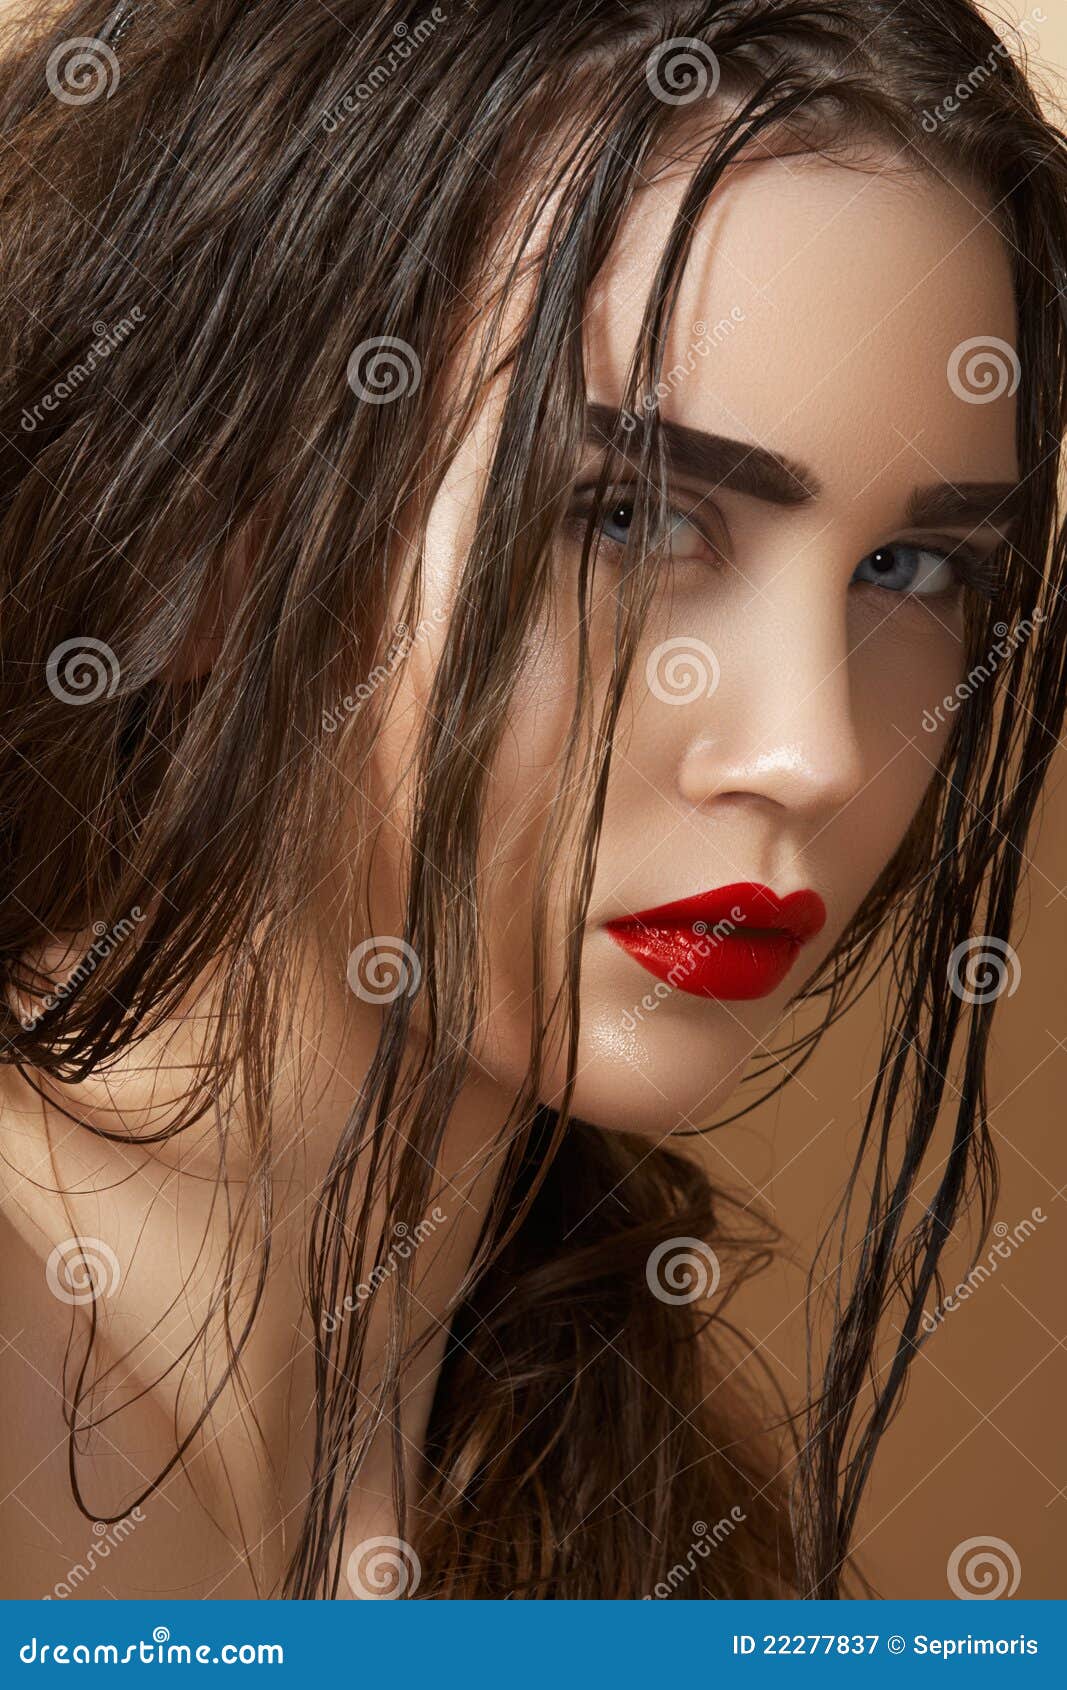 sultry look of model with damp wet hair & make-up